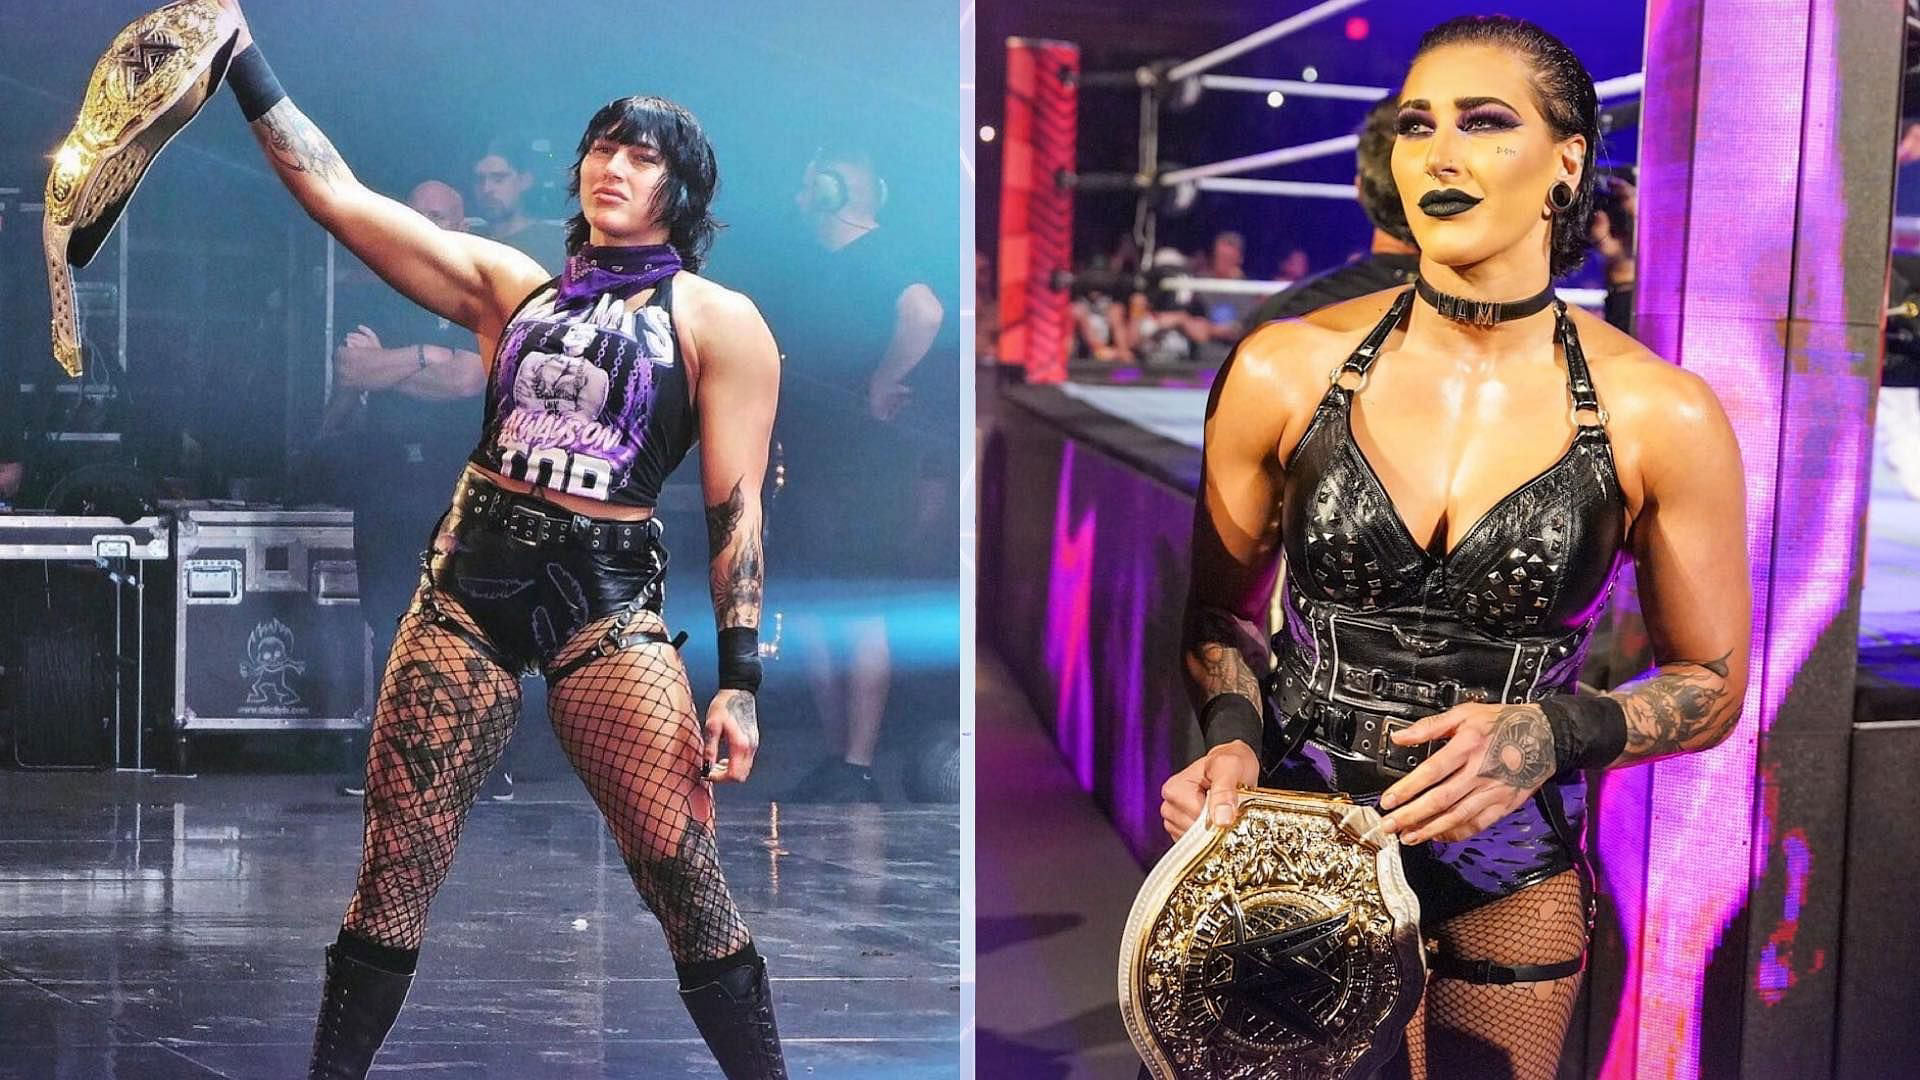 Rhea Ripley's reallife best friend to take her title? 4 possible